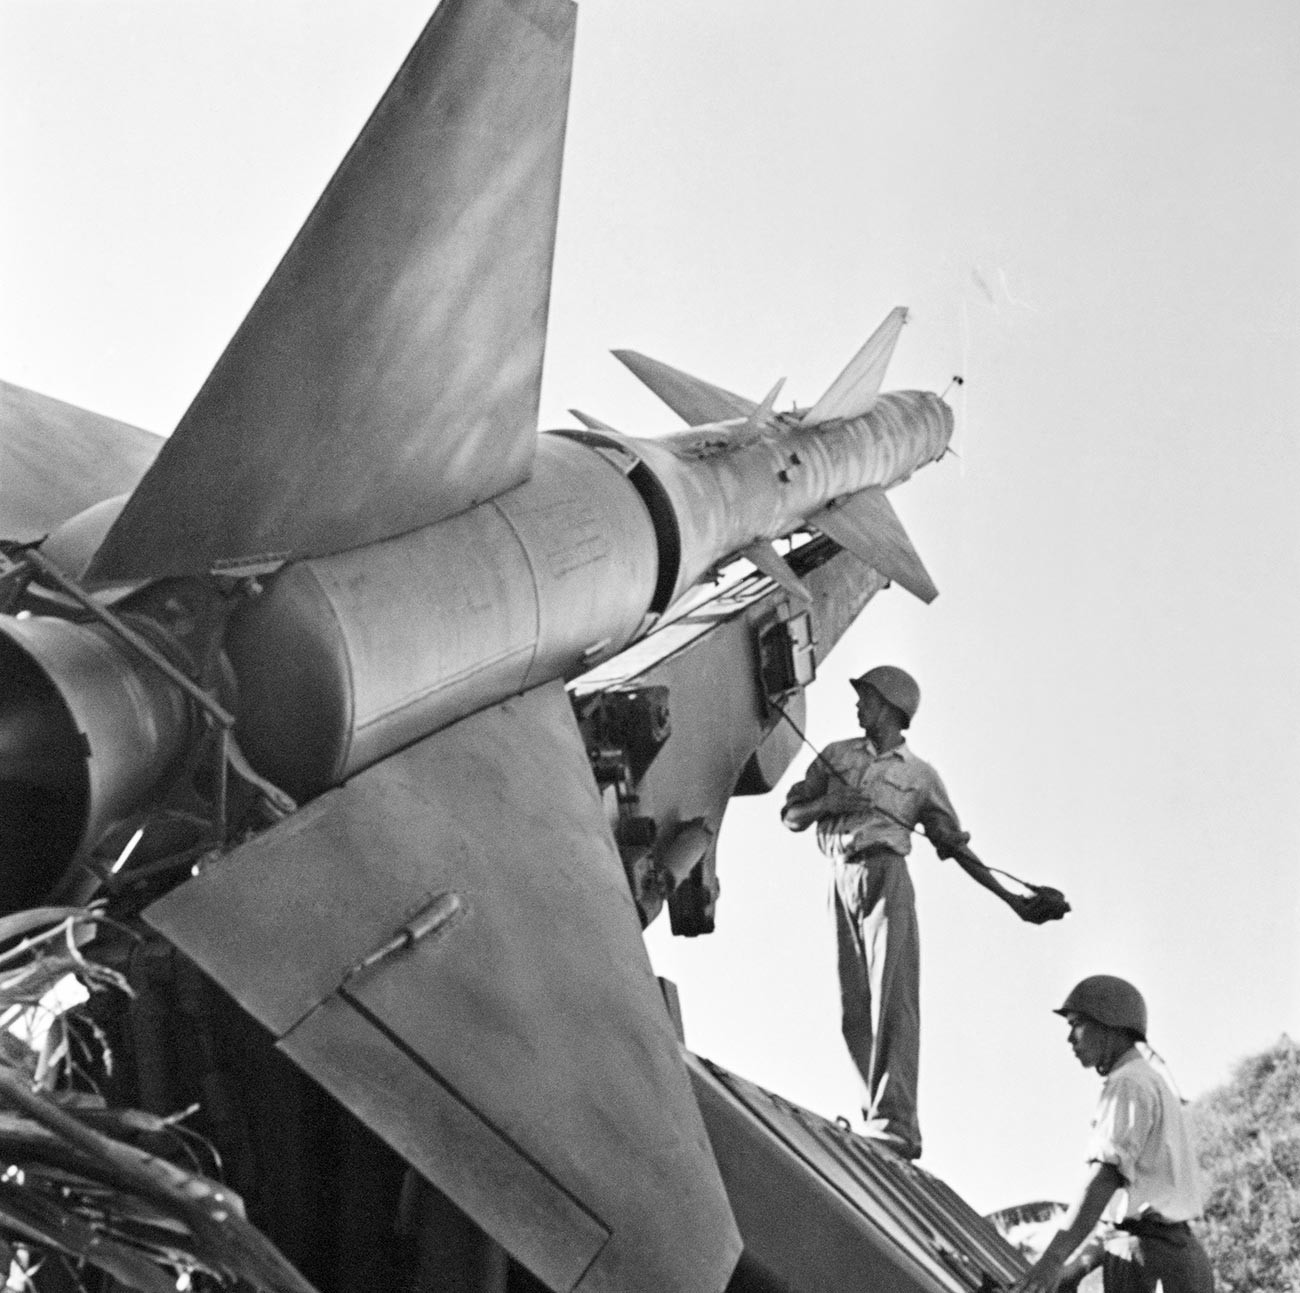 Vietnamese People's Army soldiers stand near the anti-aircraft missile, that protects the city against the U.S. Air Force raids.